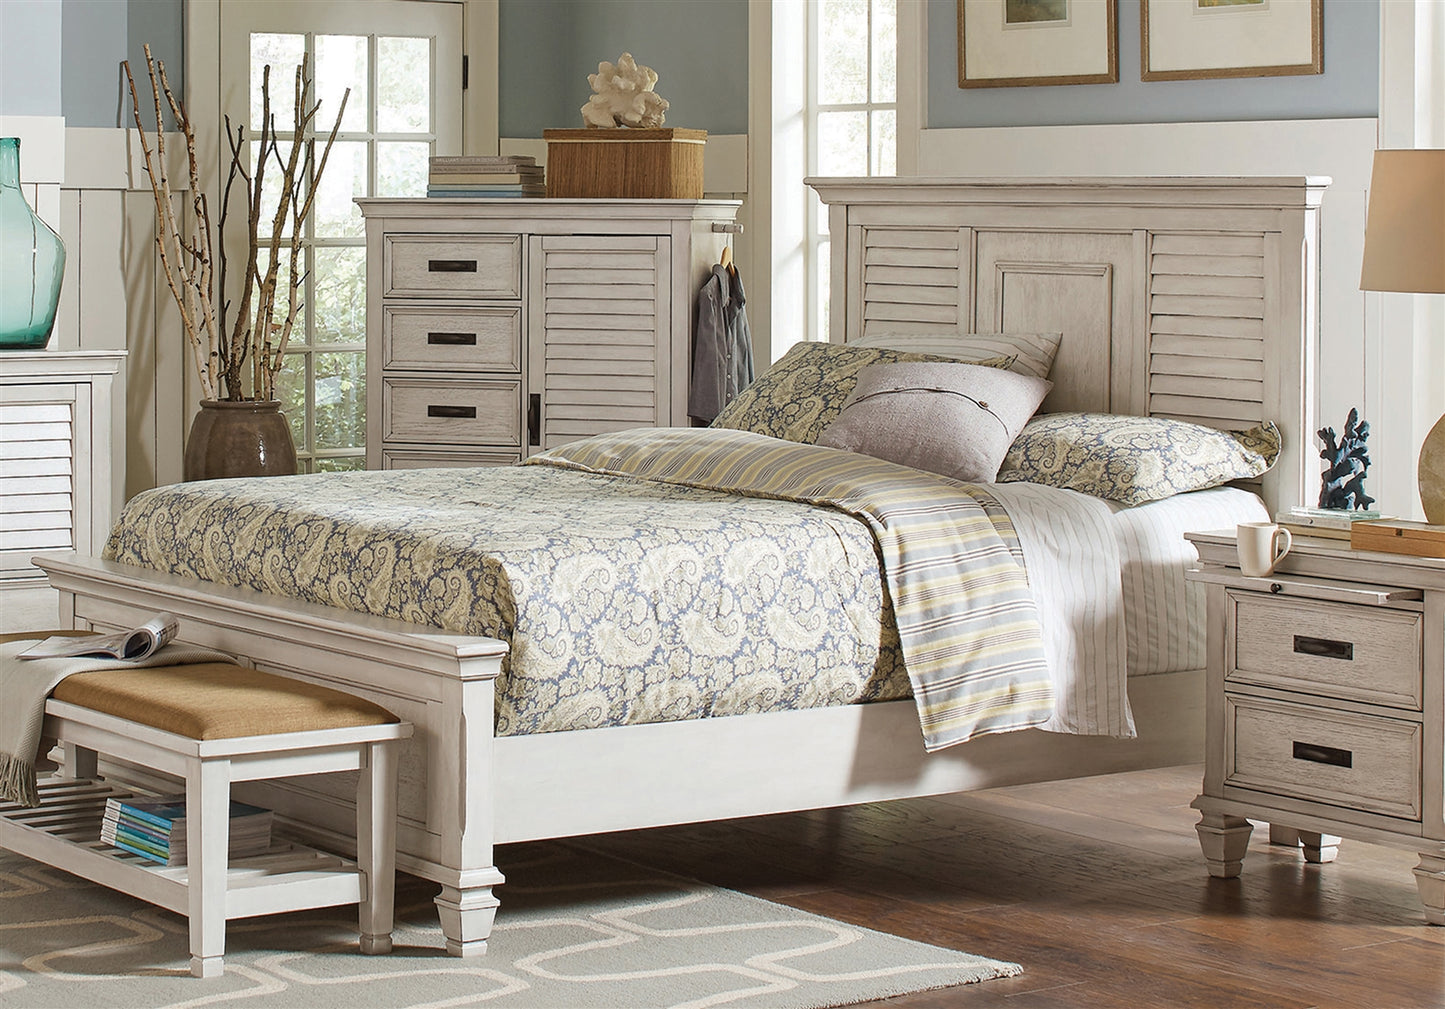 Franco II Modern Rustic Distressed White Finish Queen Bed